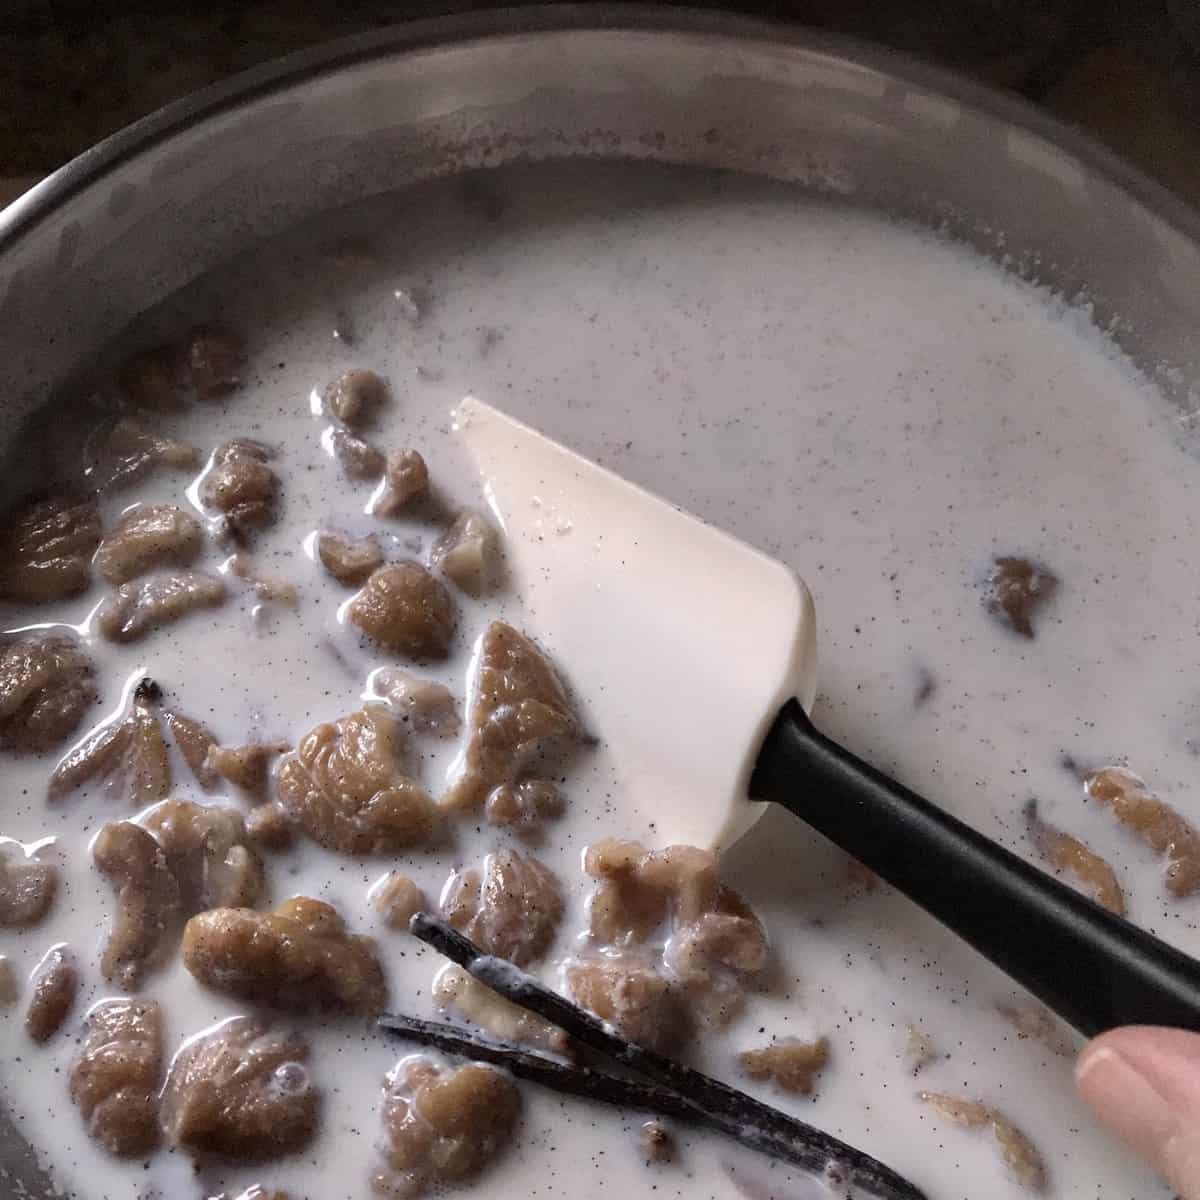 Chestnuts being simmered with milk in a saucepan.